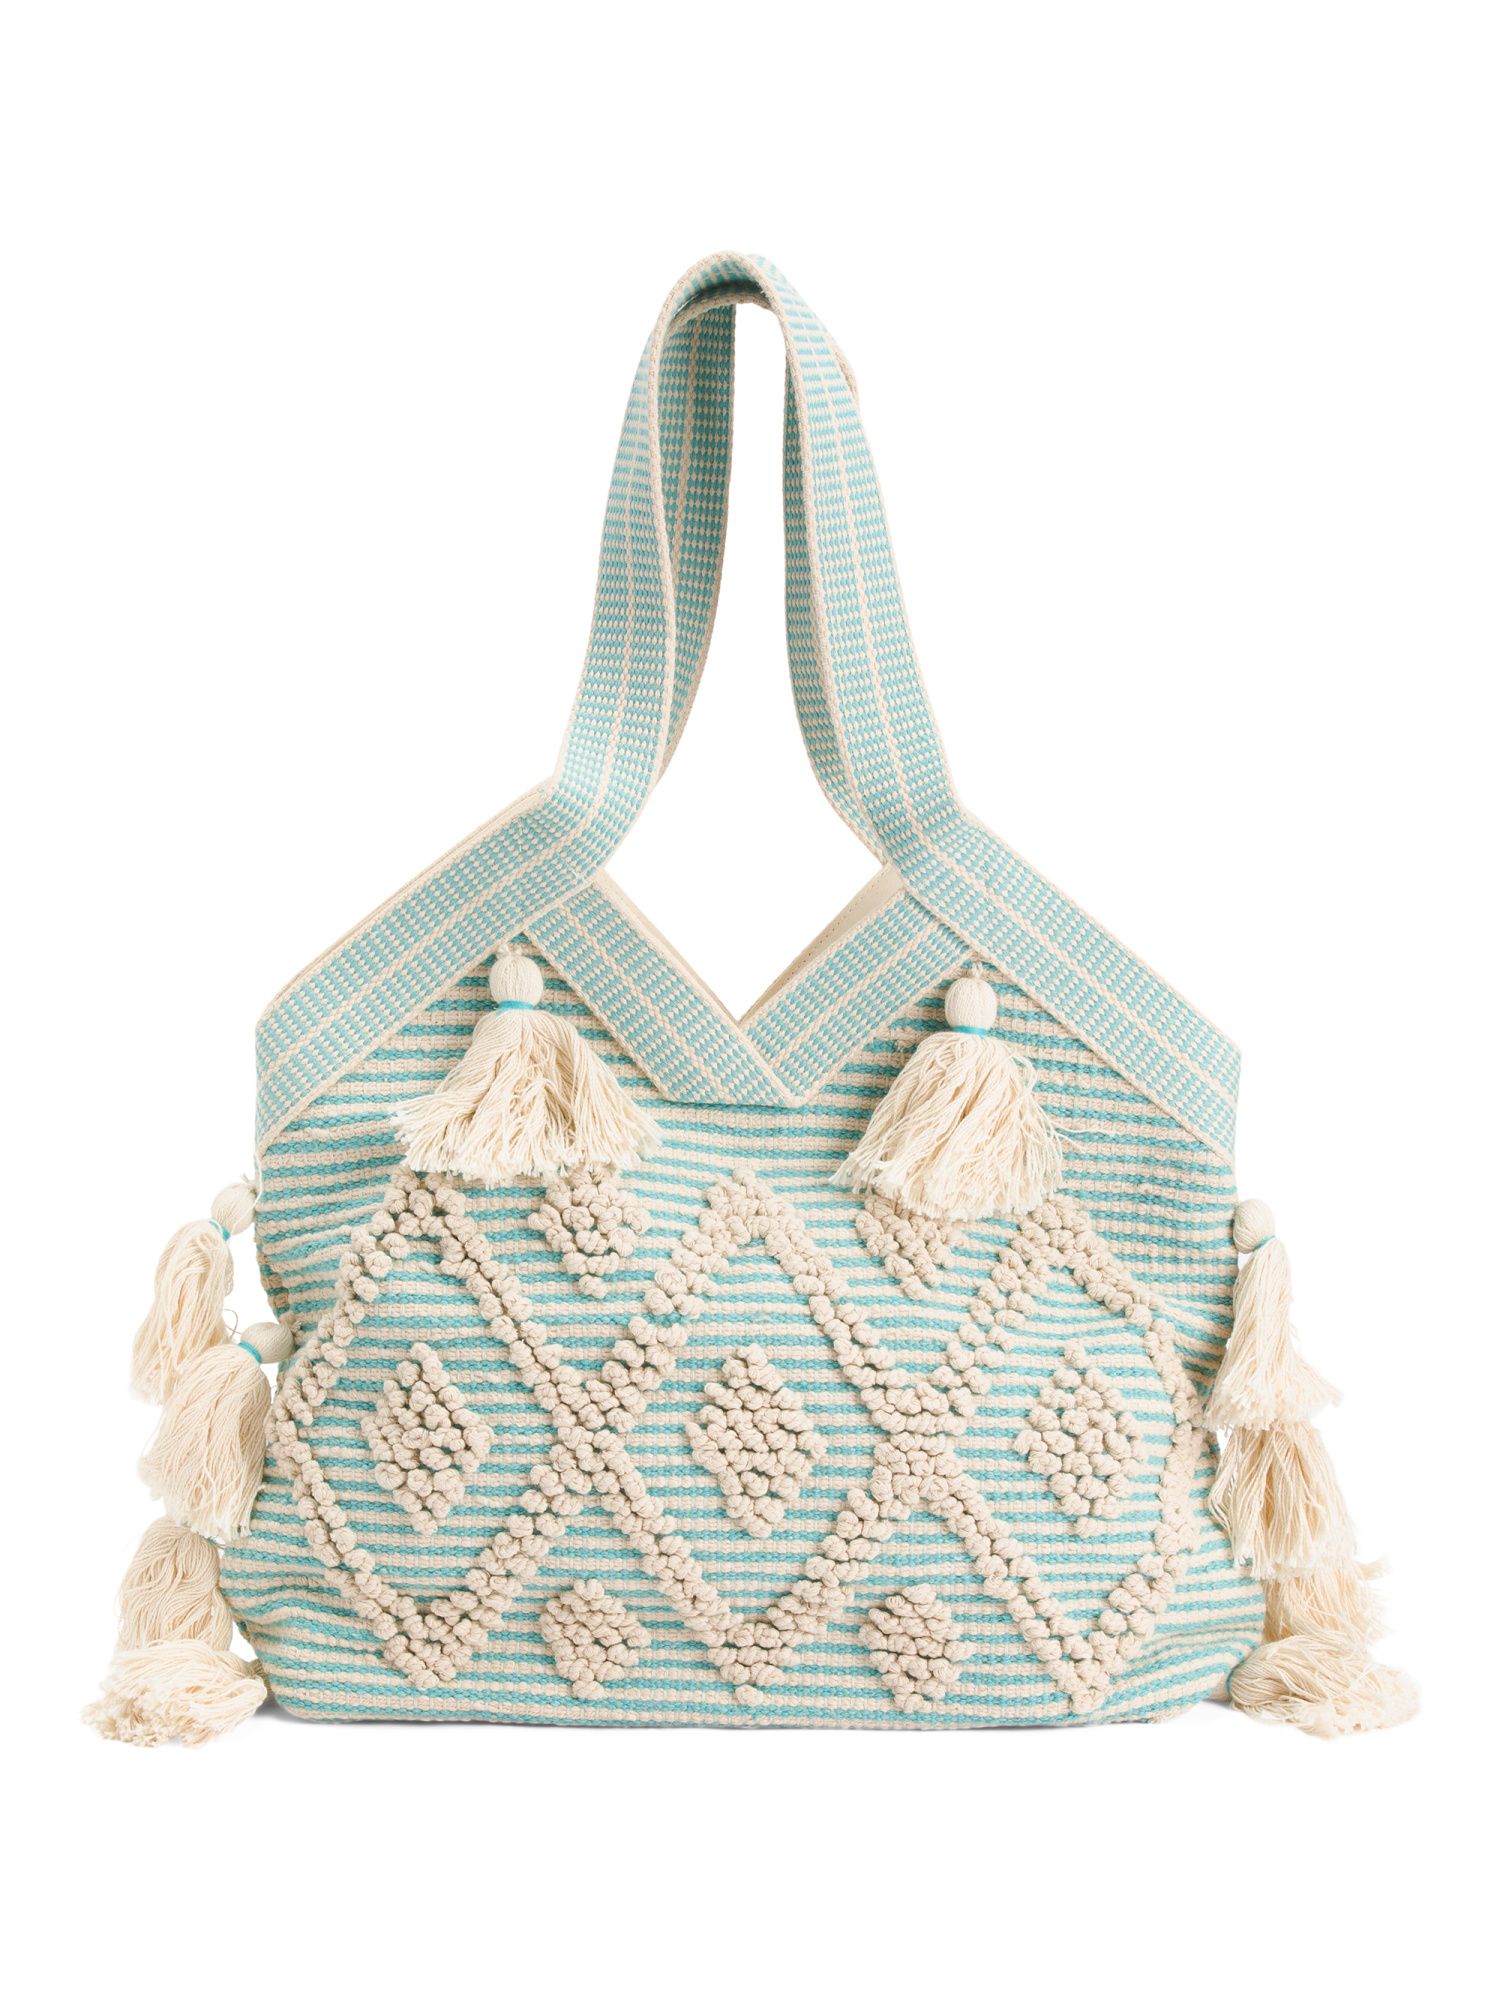 Large Woven Patterned Tote With Tassels | Marshalls